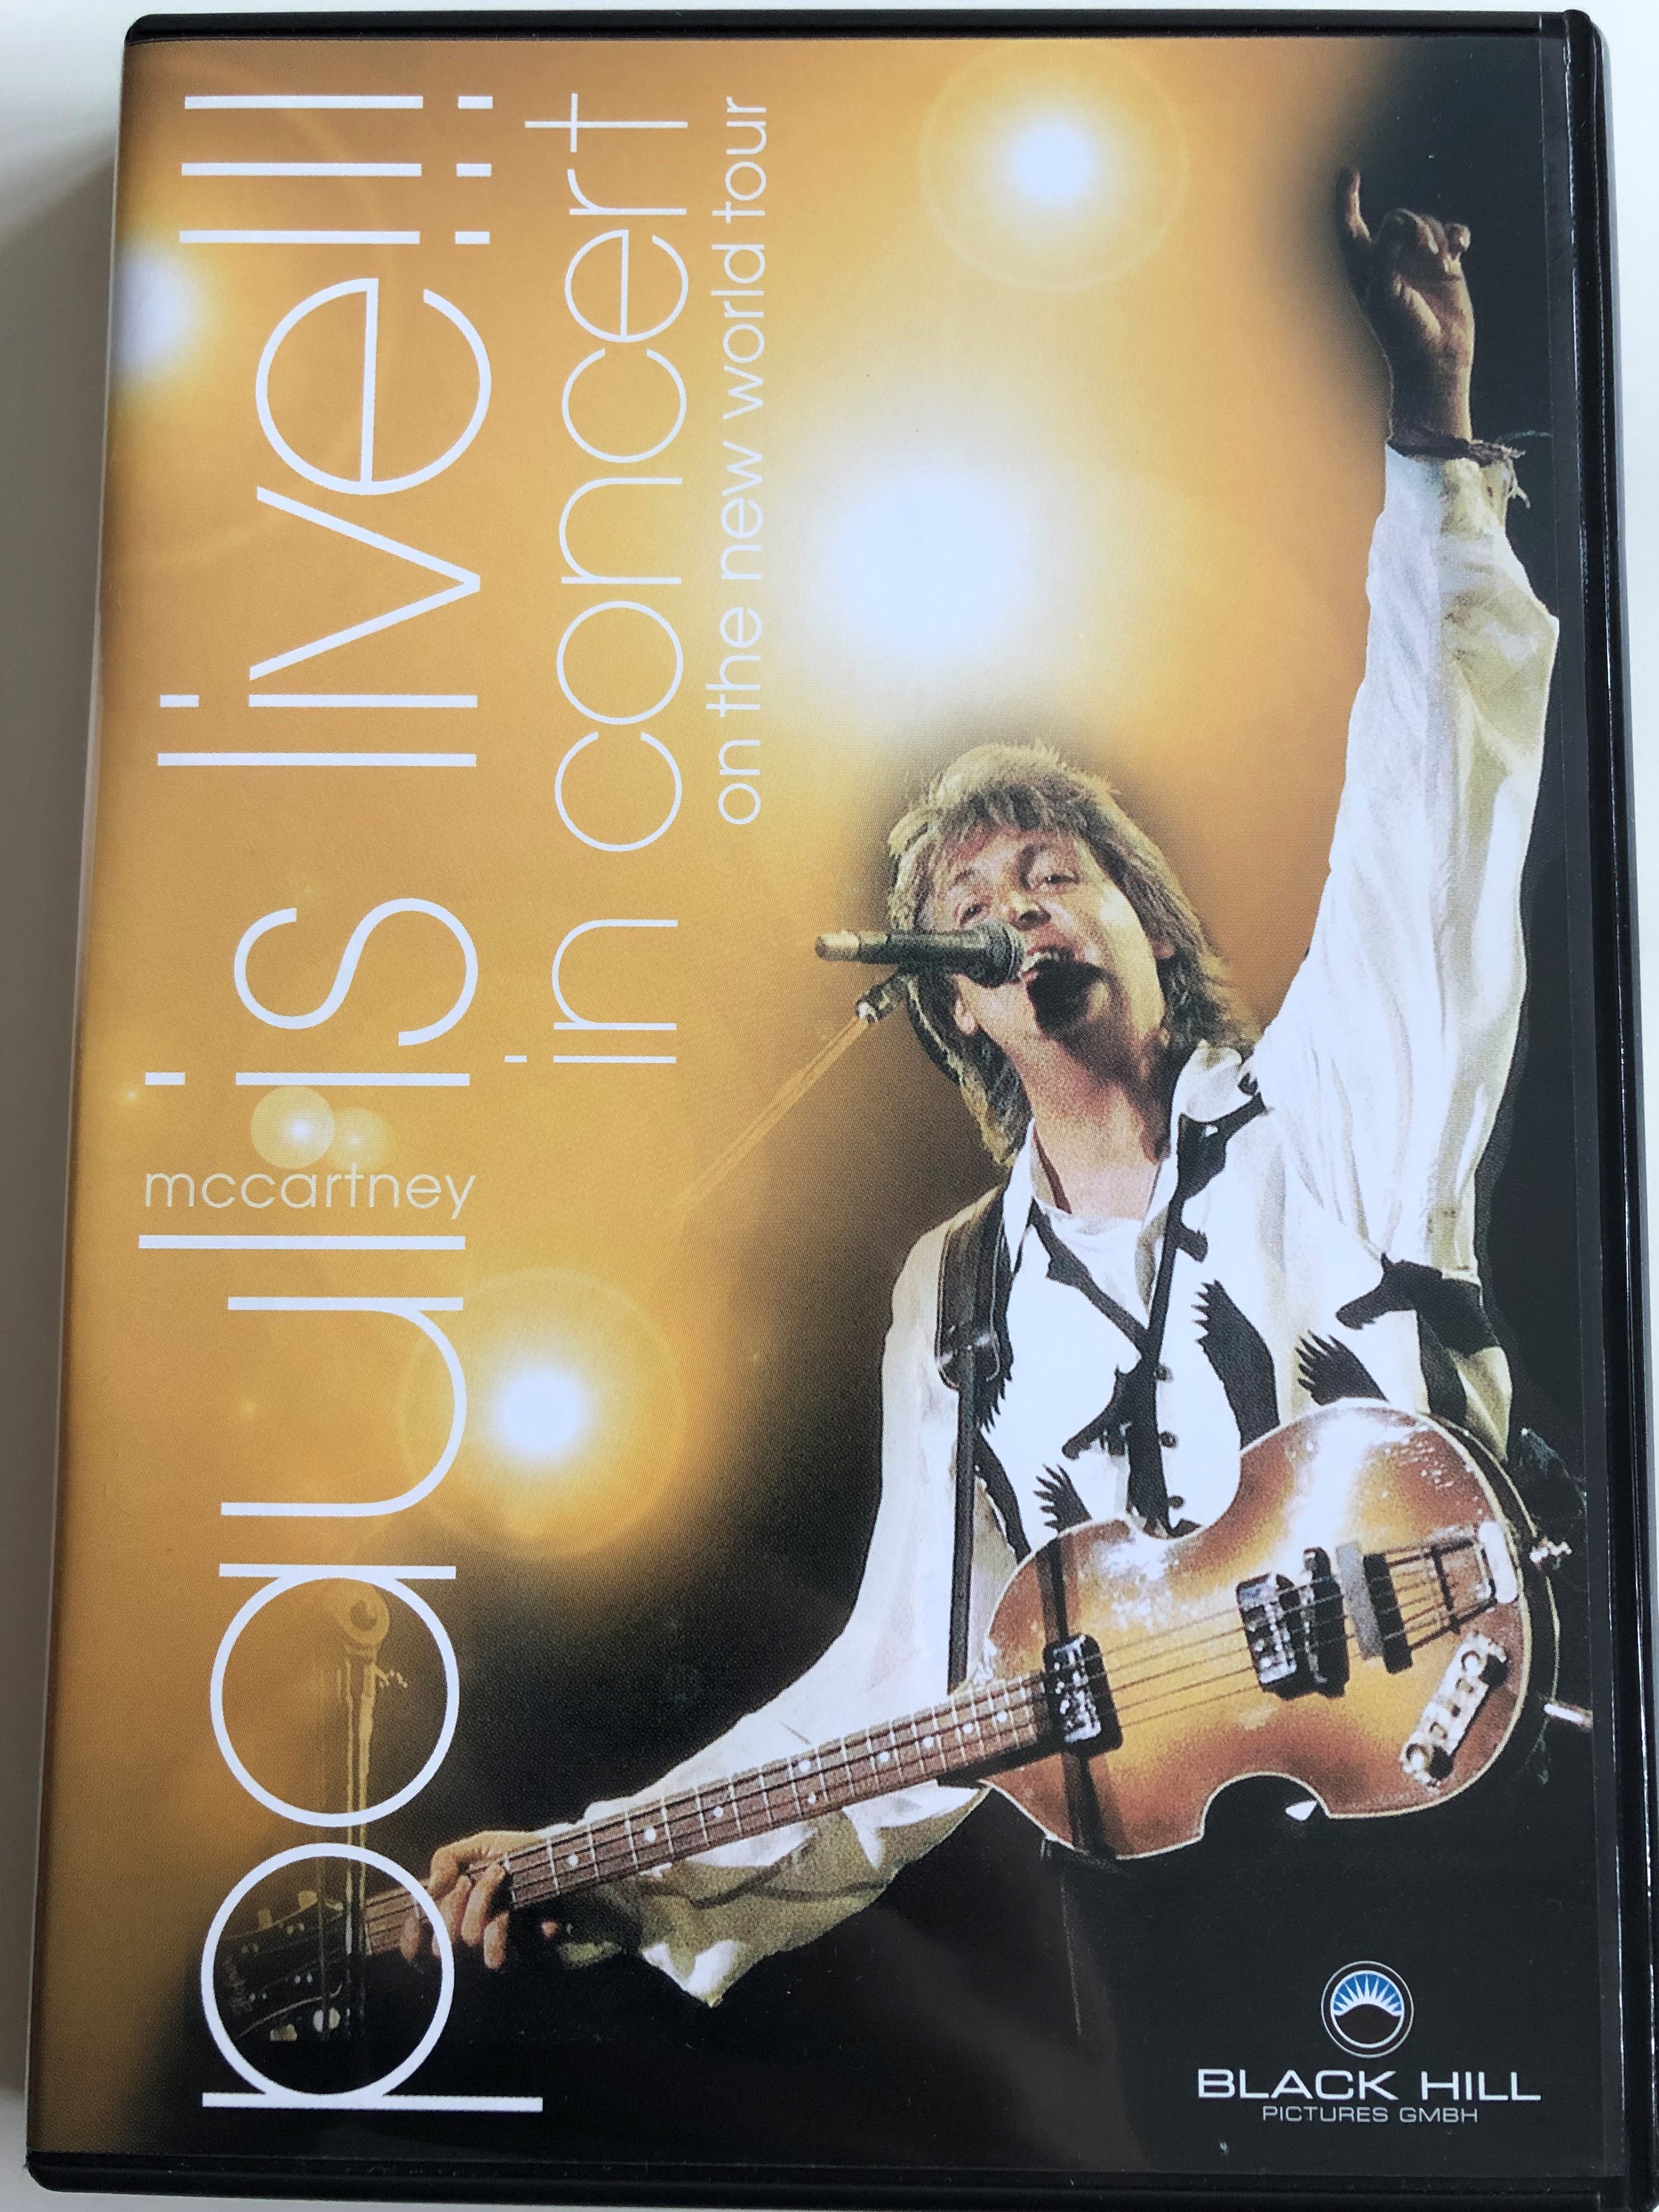 Paul McCartney is Live!!! DVD 2003 In concert On the New World Tour / All  my loving, Hope of Deliverance, Lady madonna, penny lane / Black Hill  pictures - bibleinmylanguage